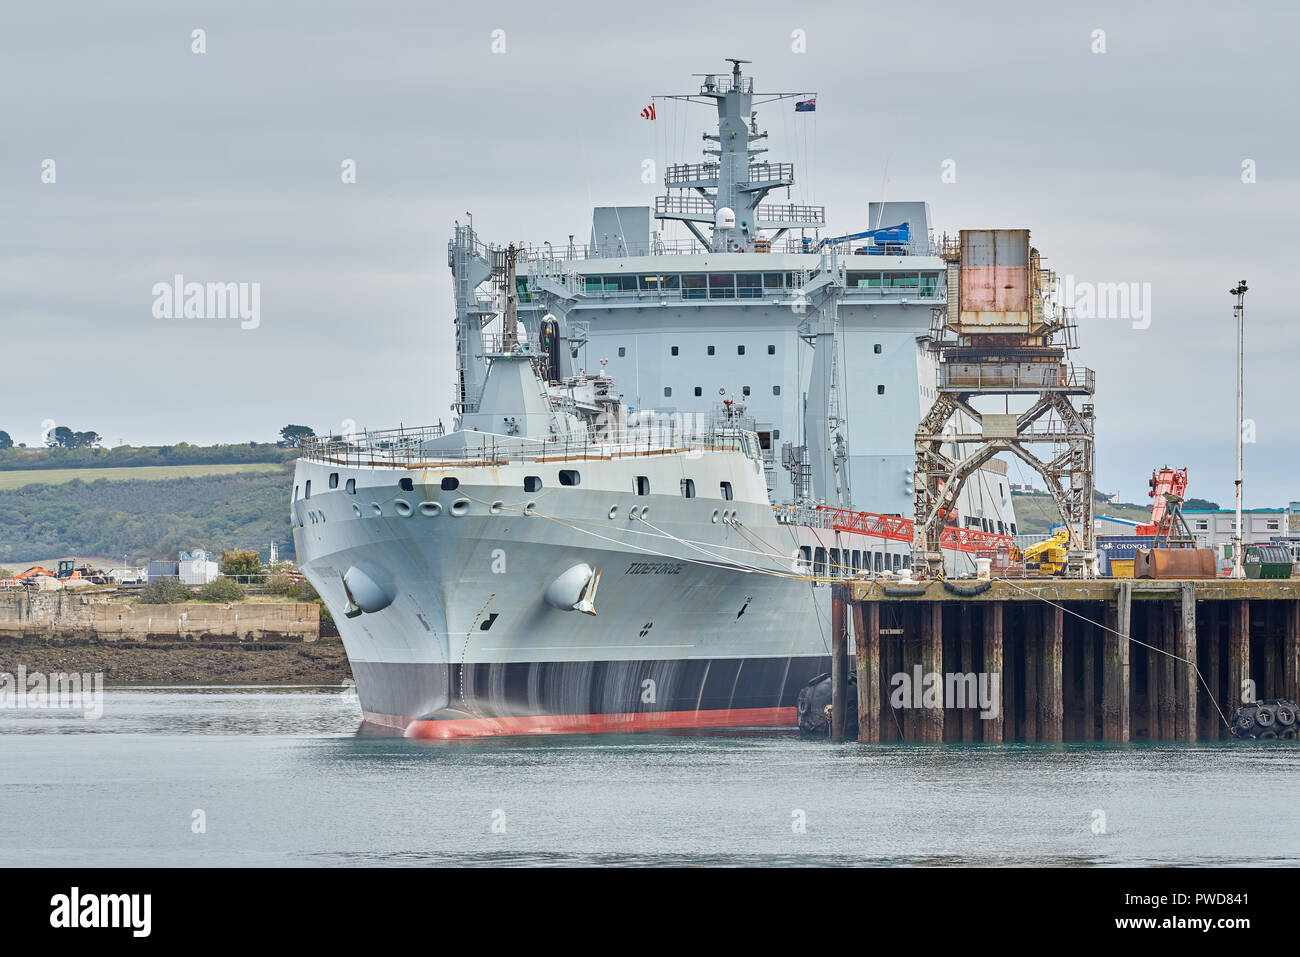 RFA Tideforce, Royal Navy tanker, moored for installation work in the docks of Falmouth harbor, Cornwall, England, on 8 october 2018. Stock Photo